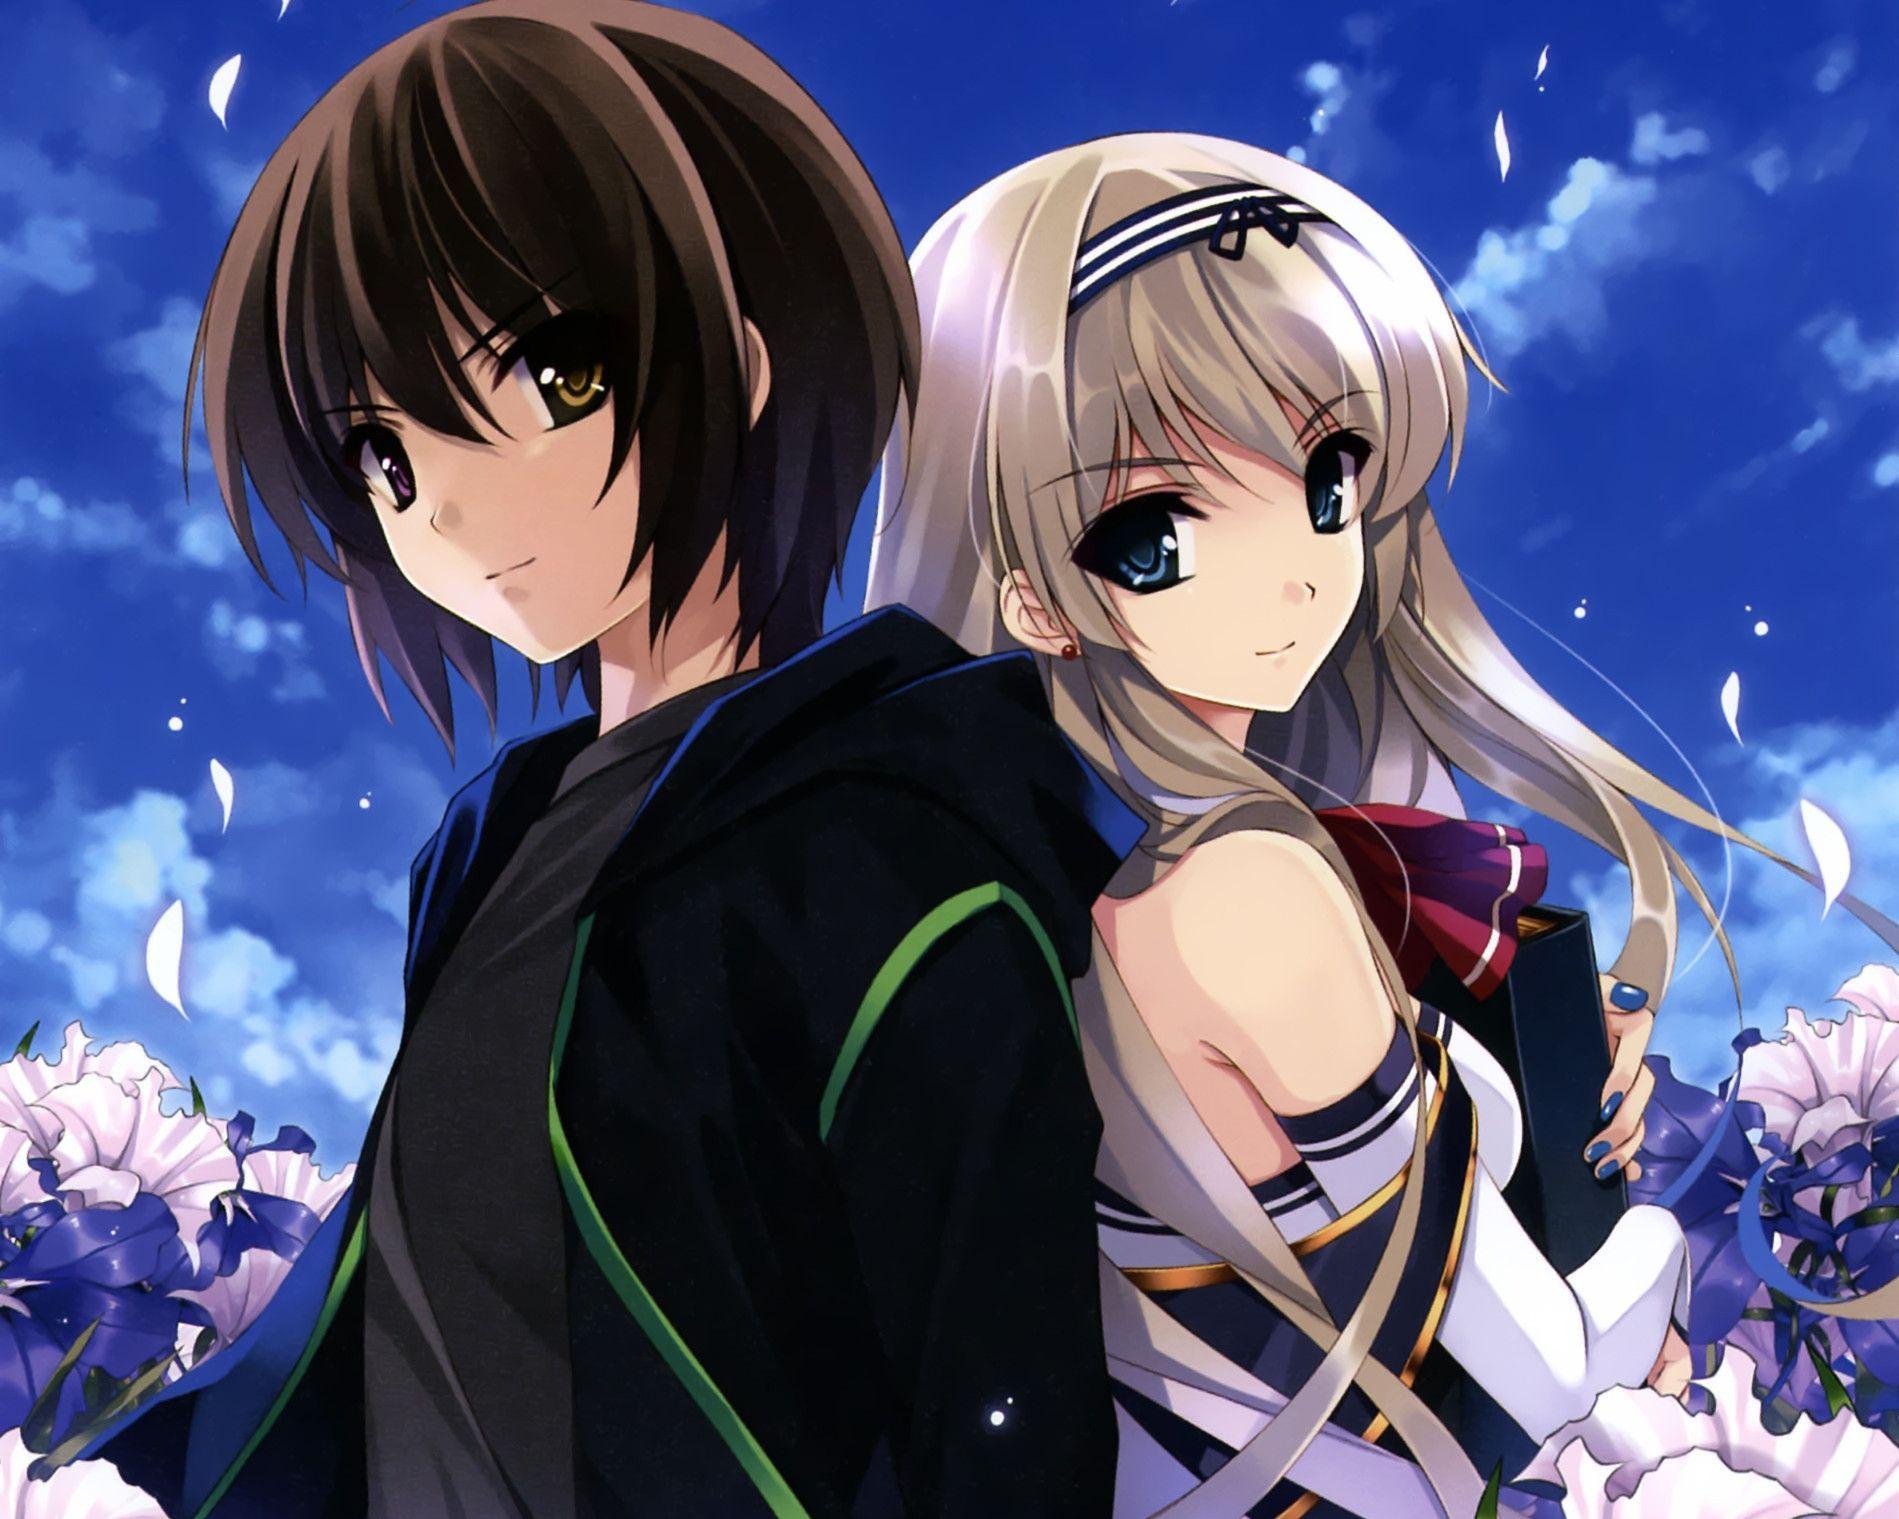 Cute Anime Couple Wallpaper. Best Games